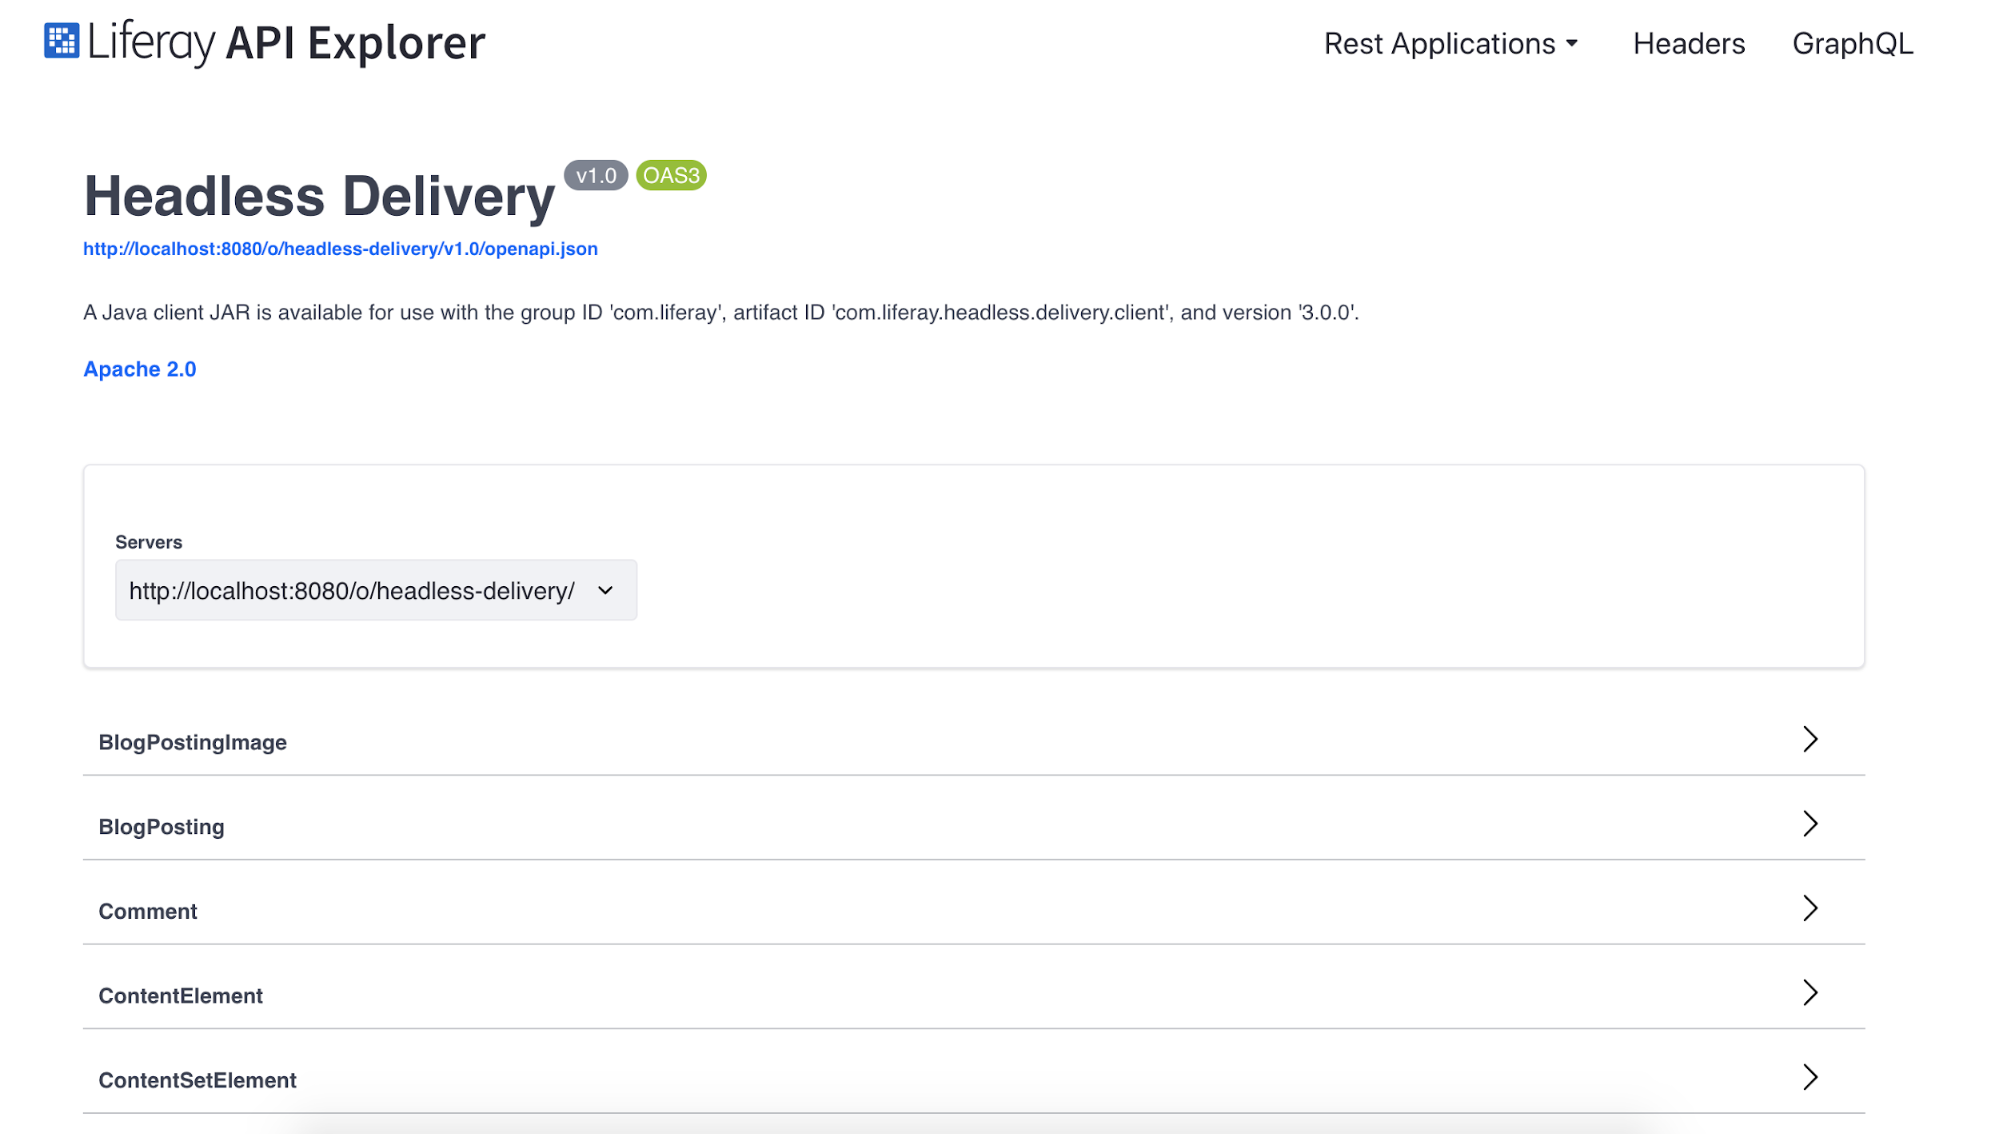 The API Explorer shows all available APIs in a Liferay DXP installation.